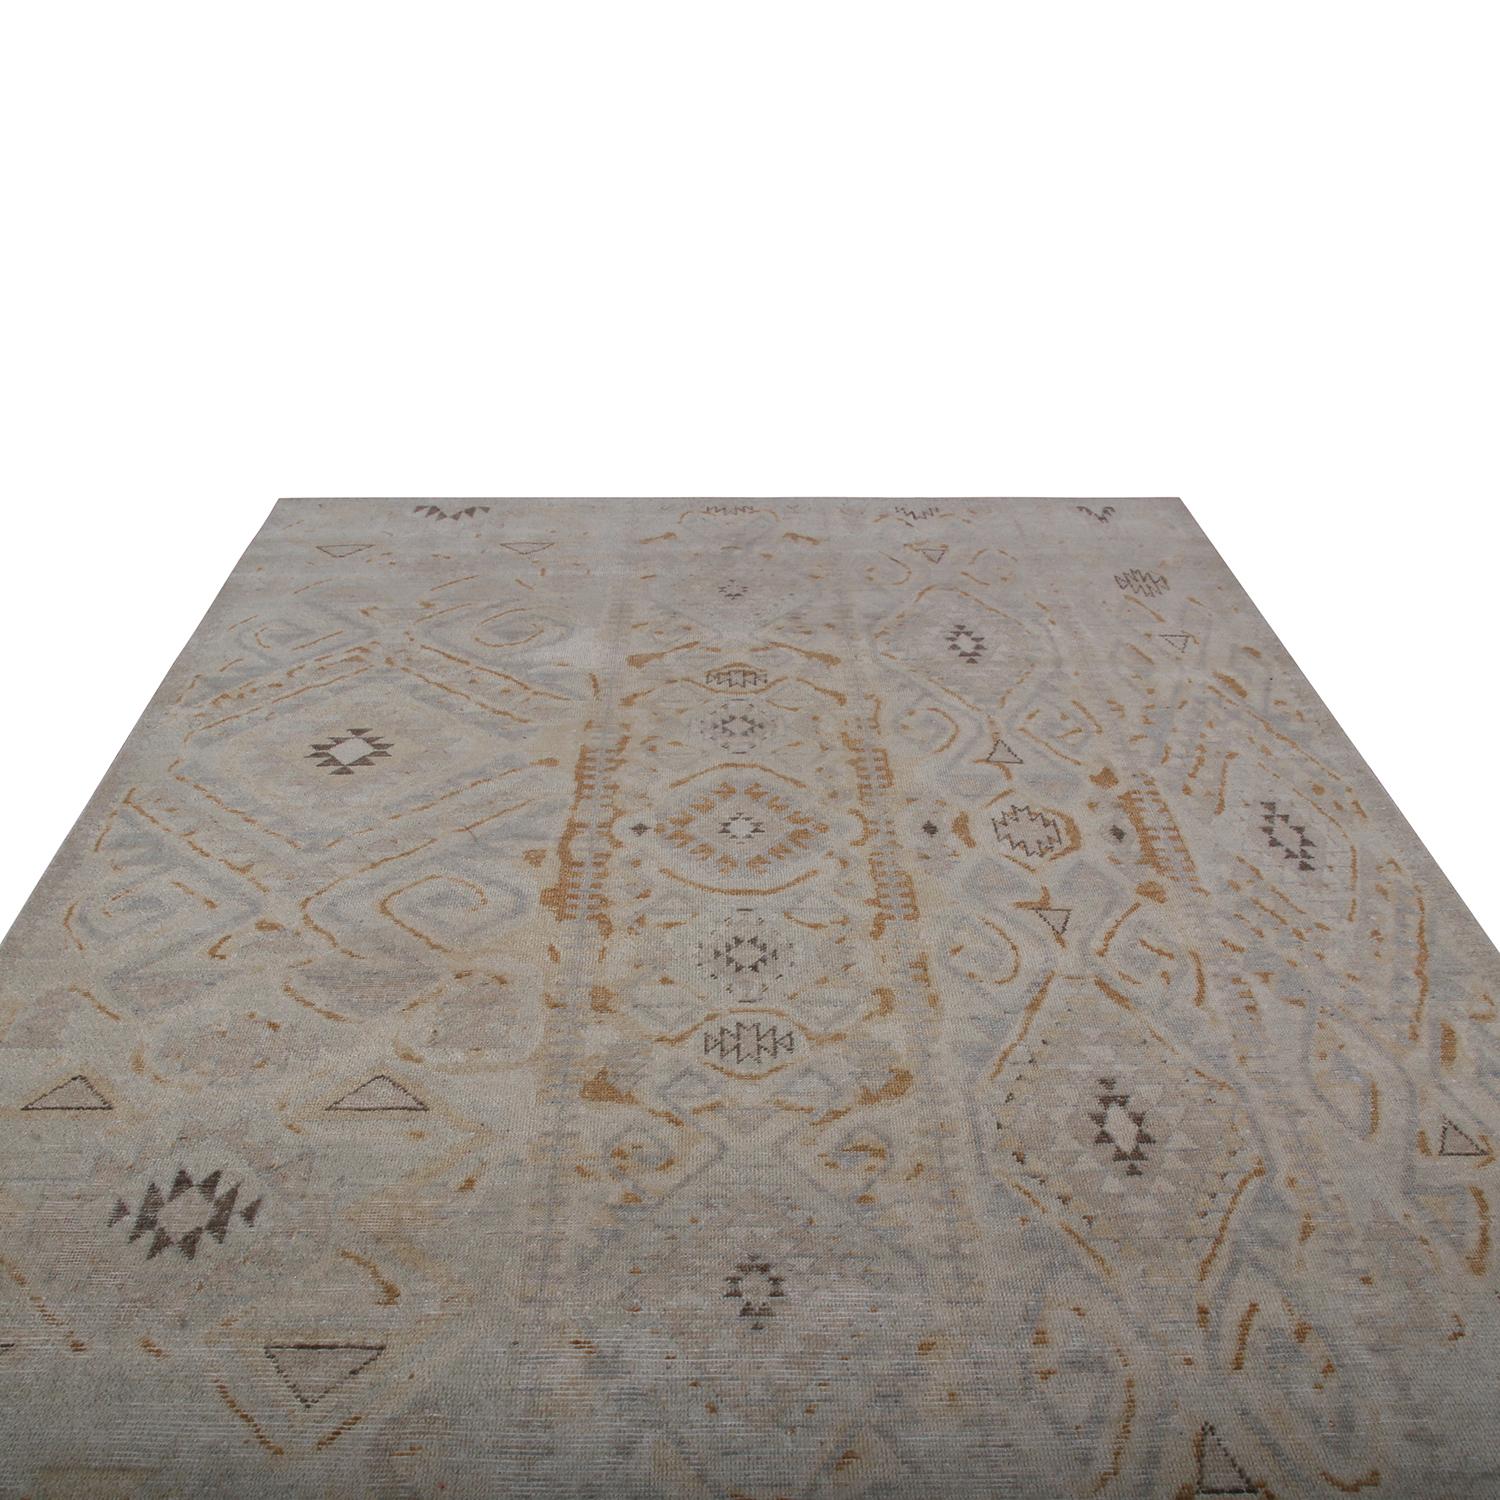 This geometric piece joins the latest additions to the Homage Collect by Rug & Kilim, an ambitious custom-capable approach to recapturing and reinventing an unprecedented range of international styles including Oriental patterns with fresh, European